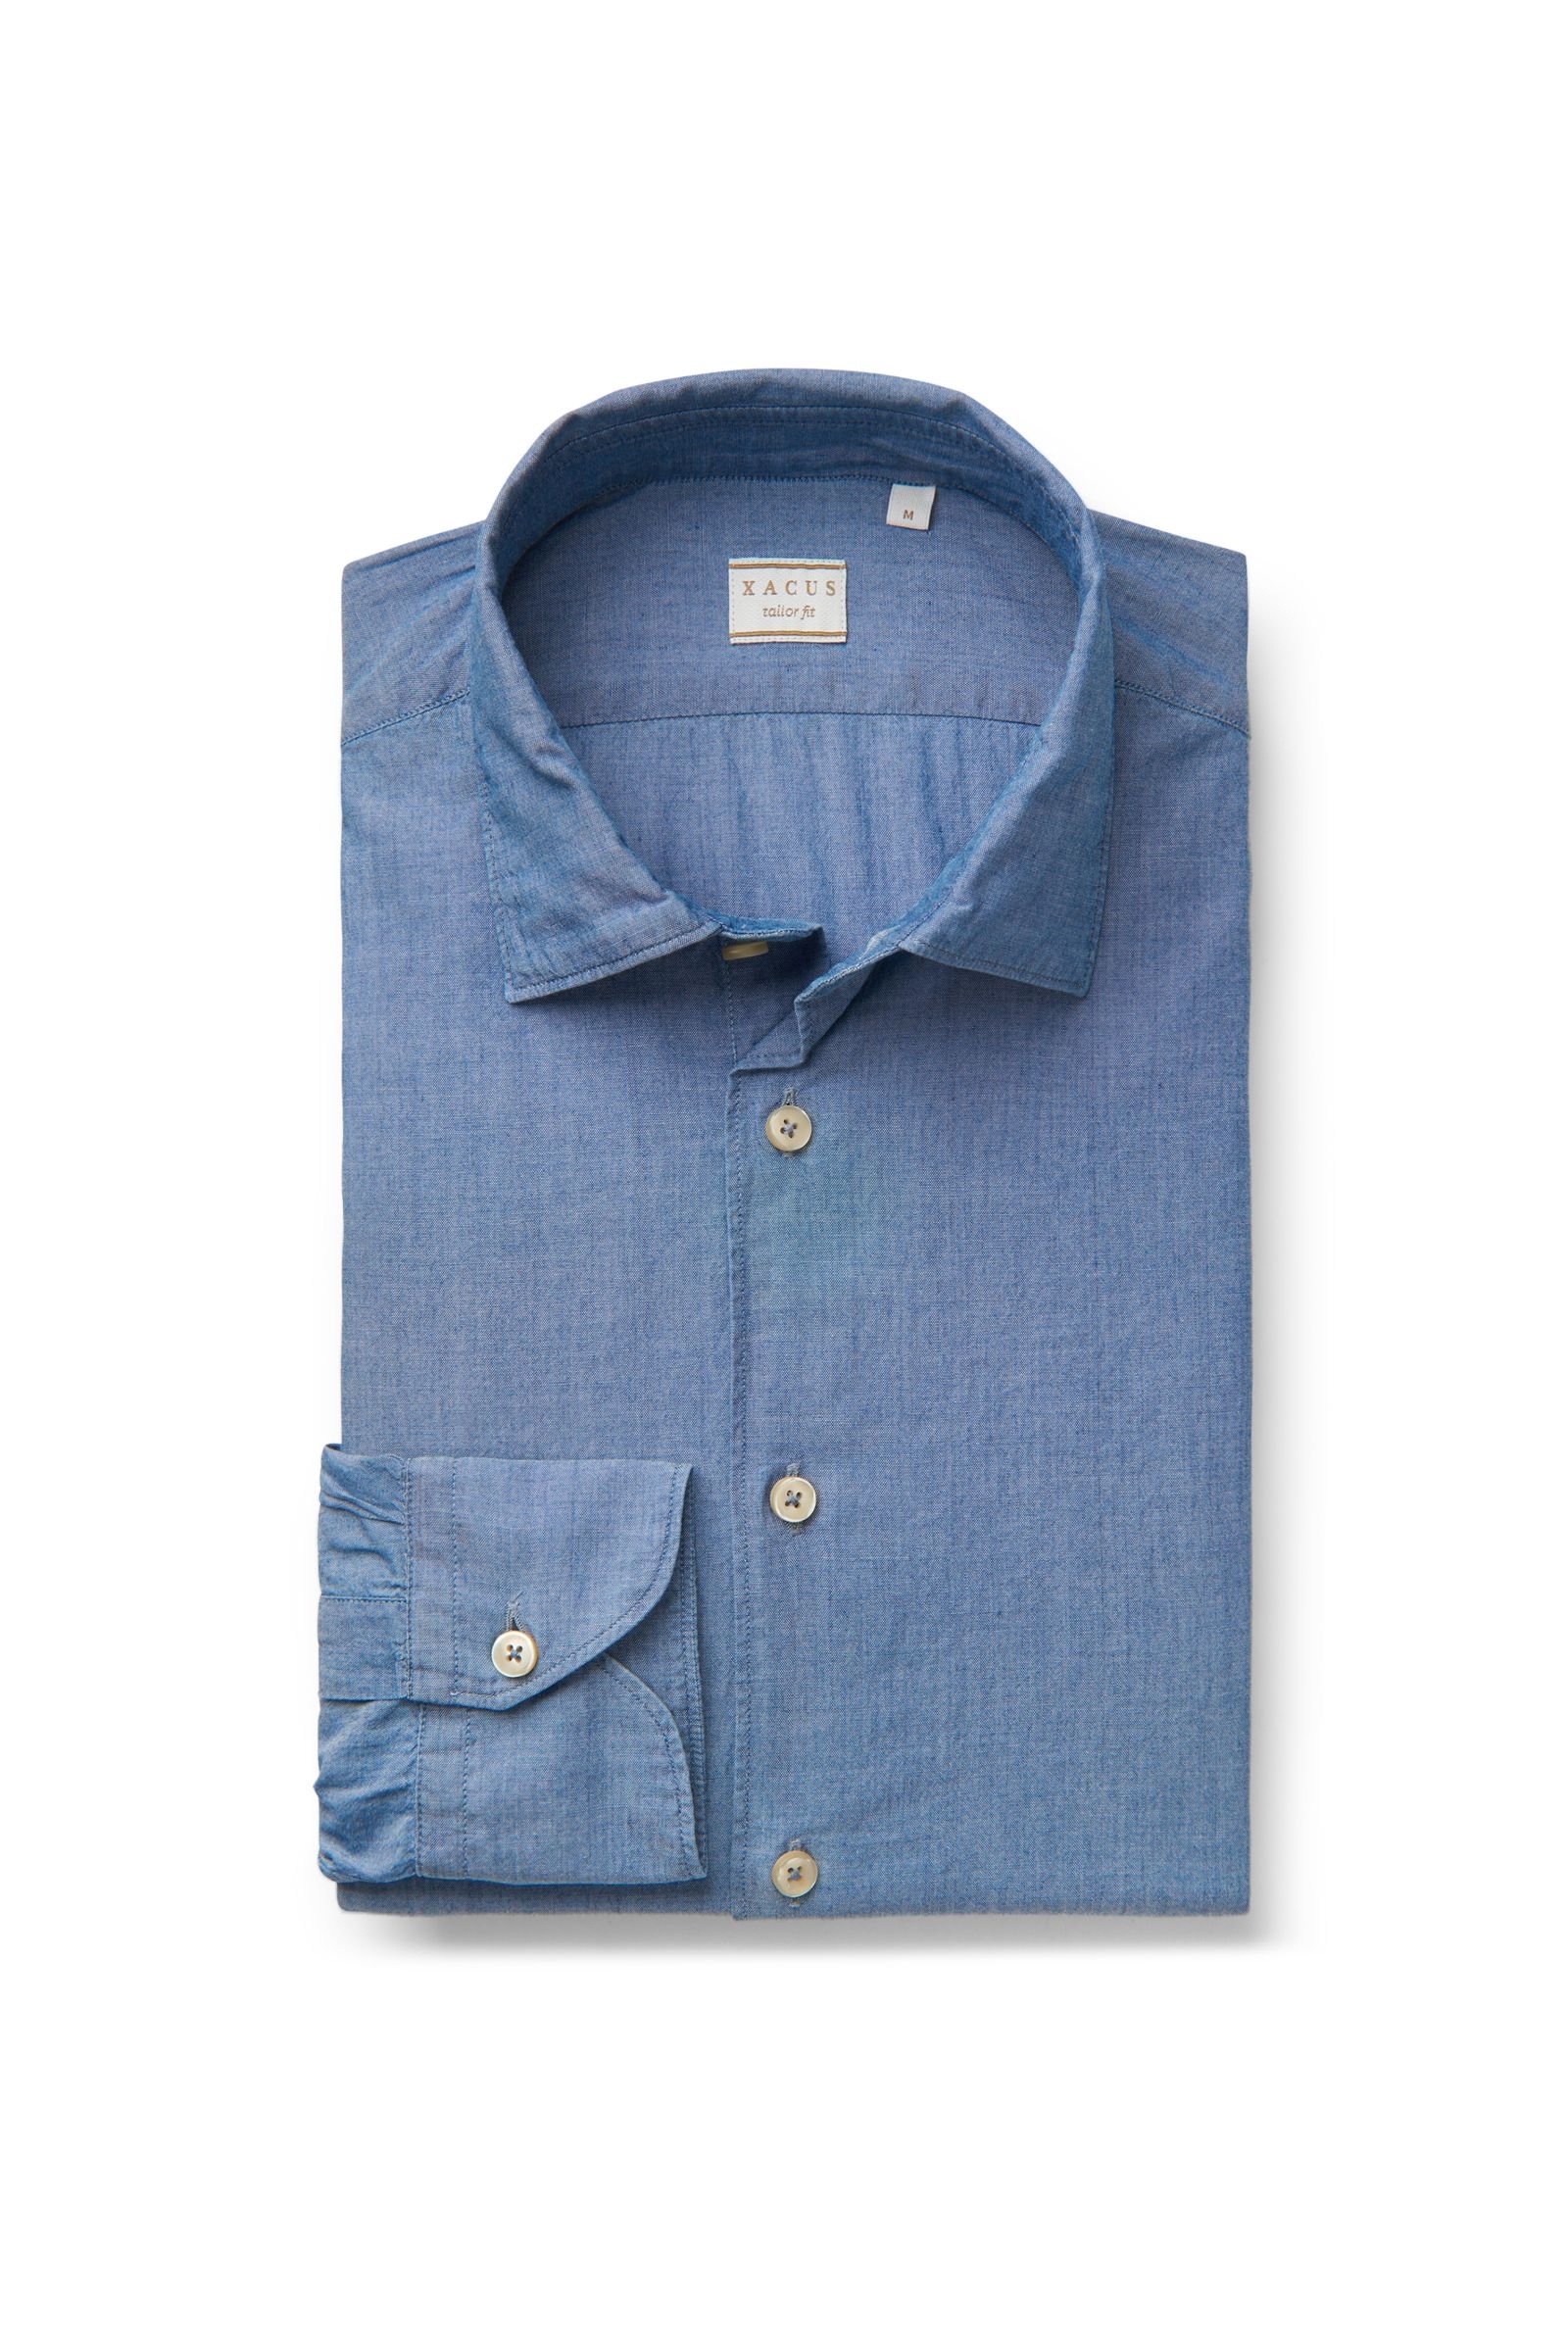 Chambray shirt 'Tailor Fit' slim collar grey-blue